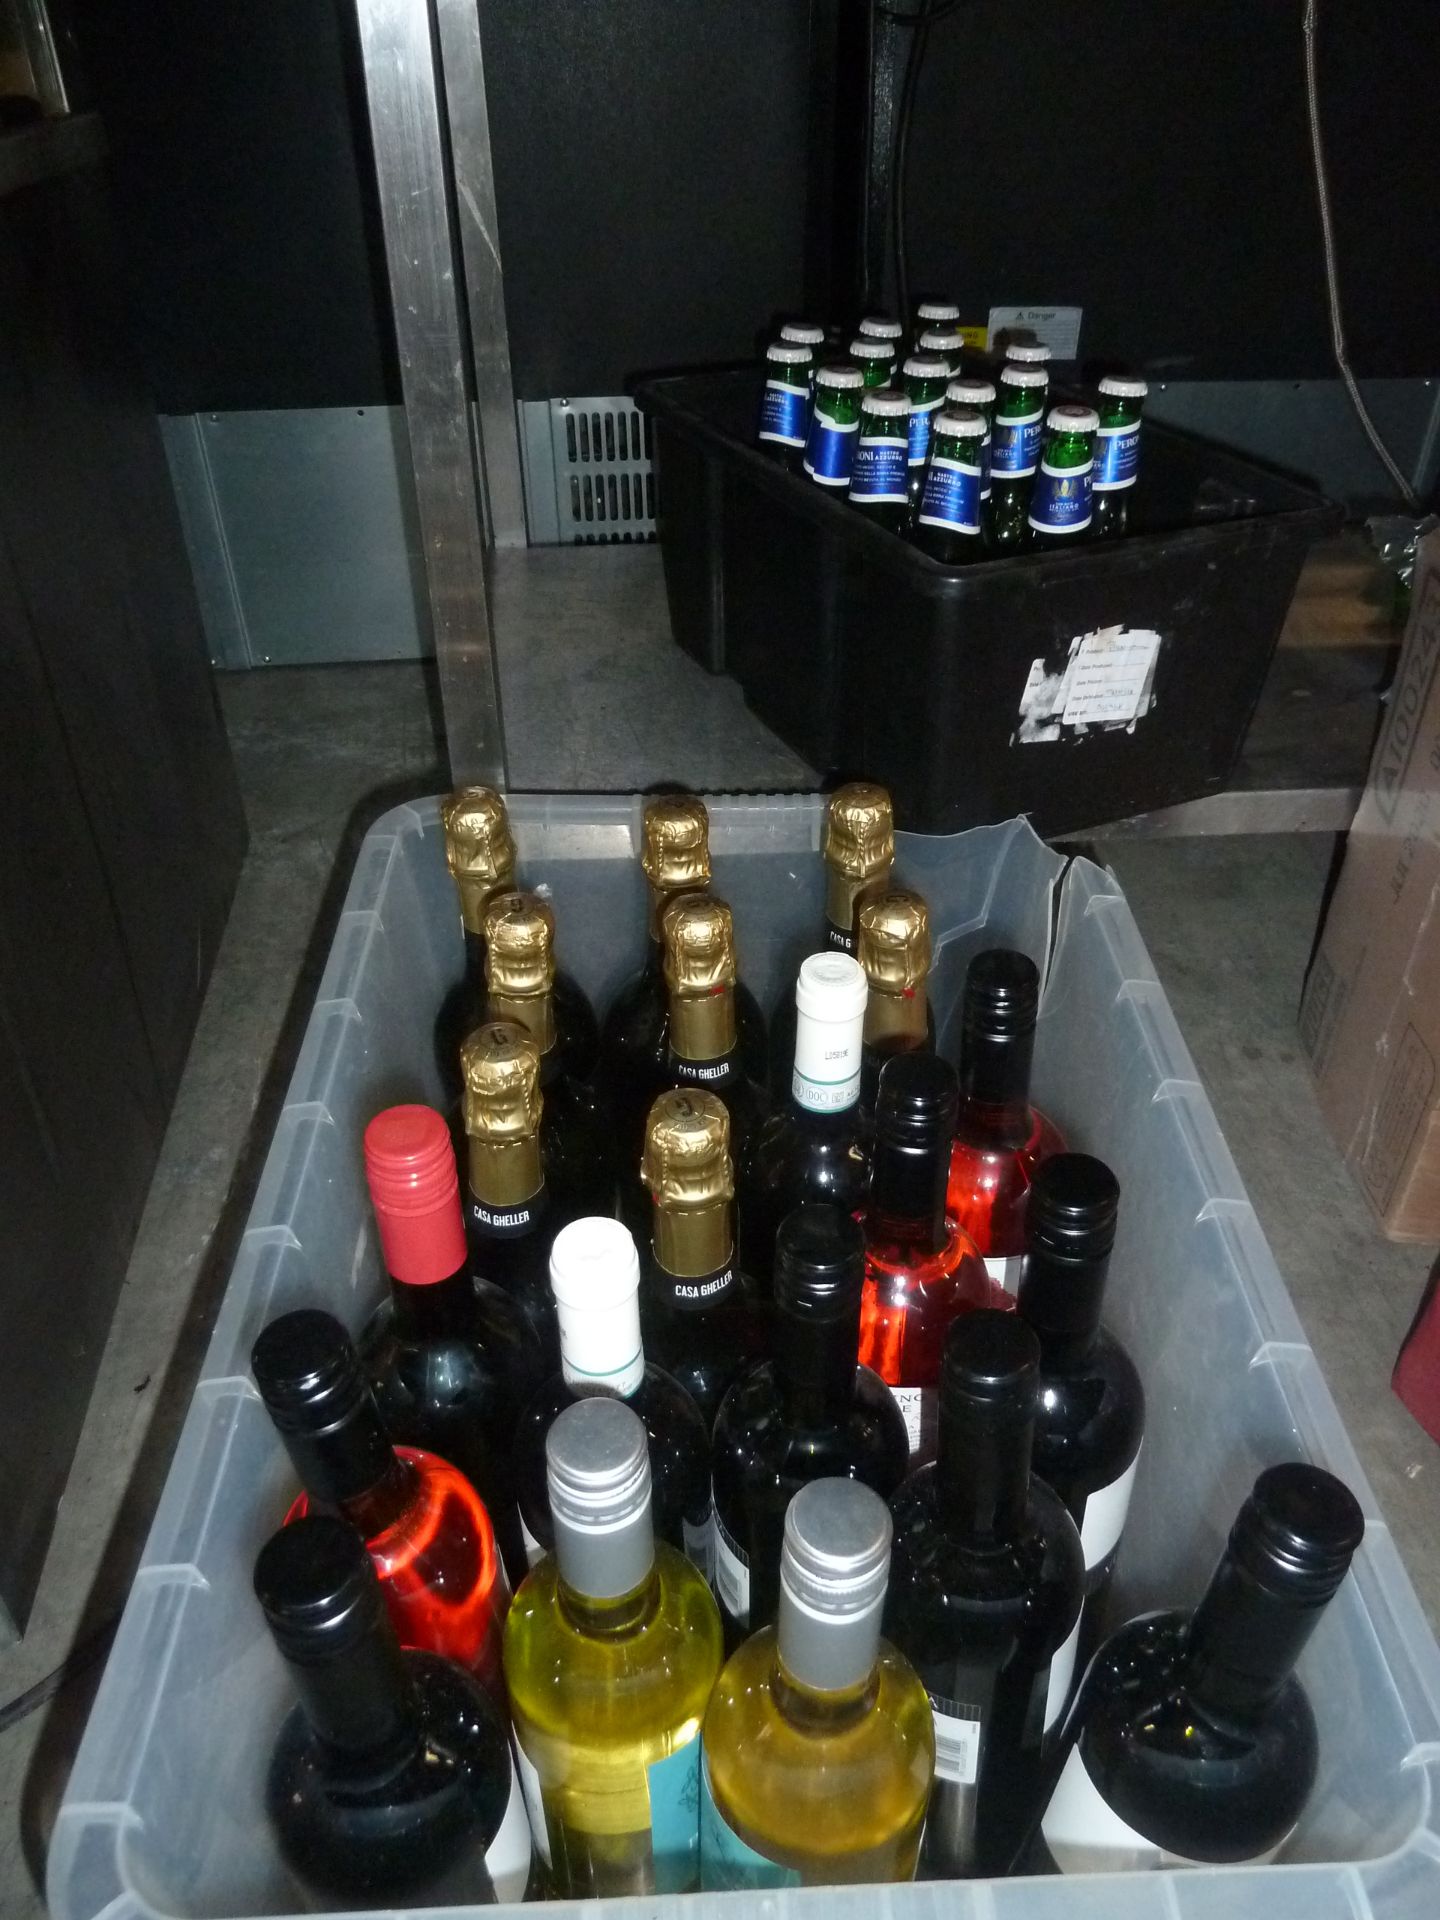 *Selection of alcoholic drinks - including Prosecco, wine and bottled beers - approx. 35 items